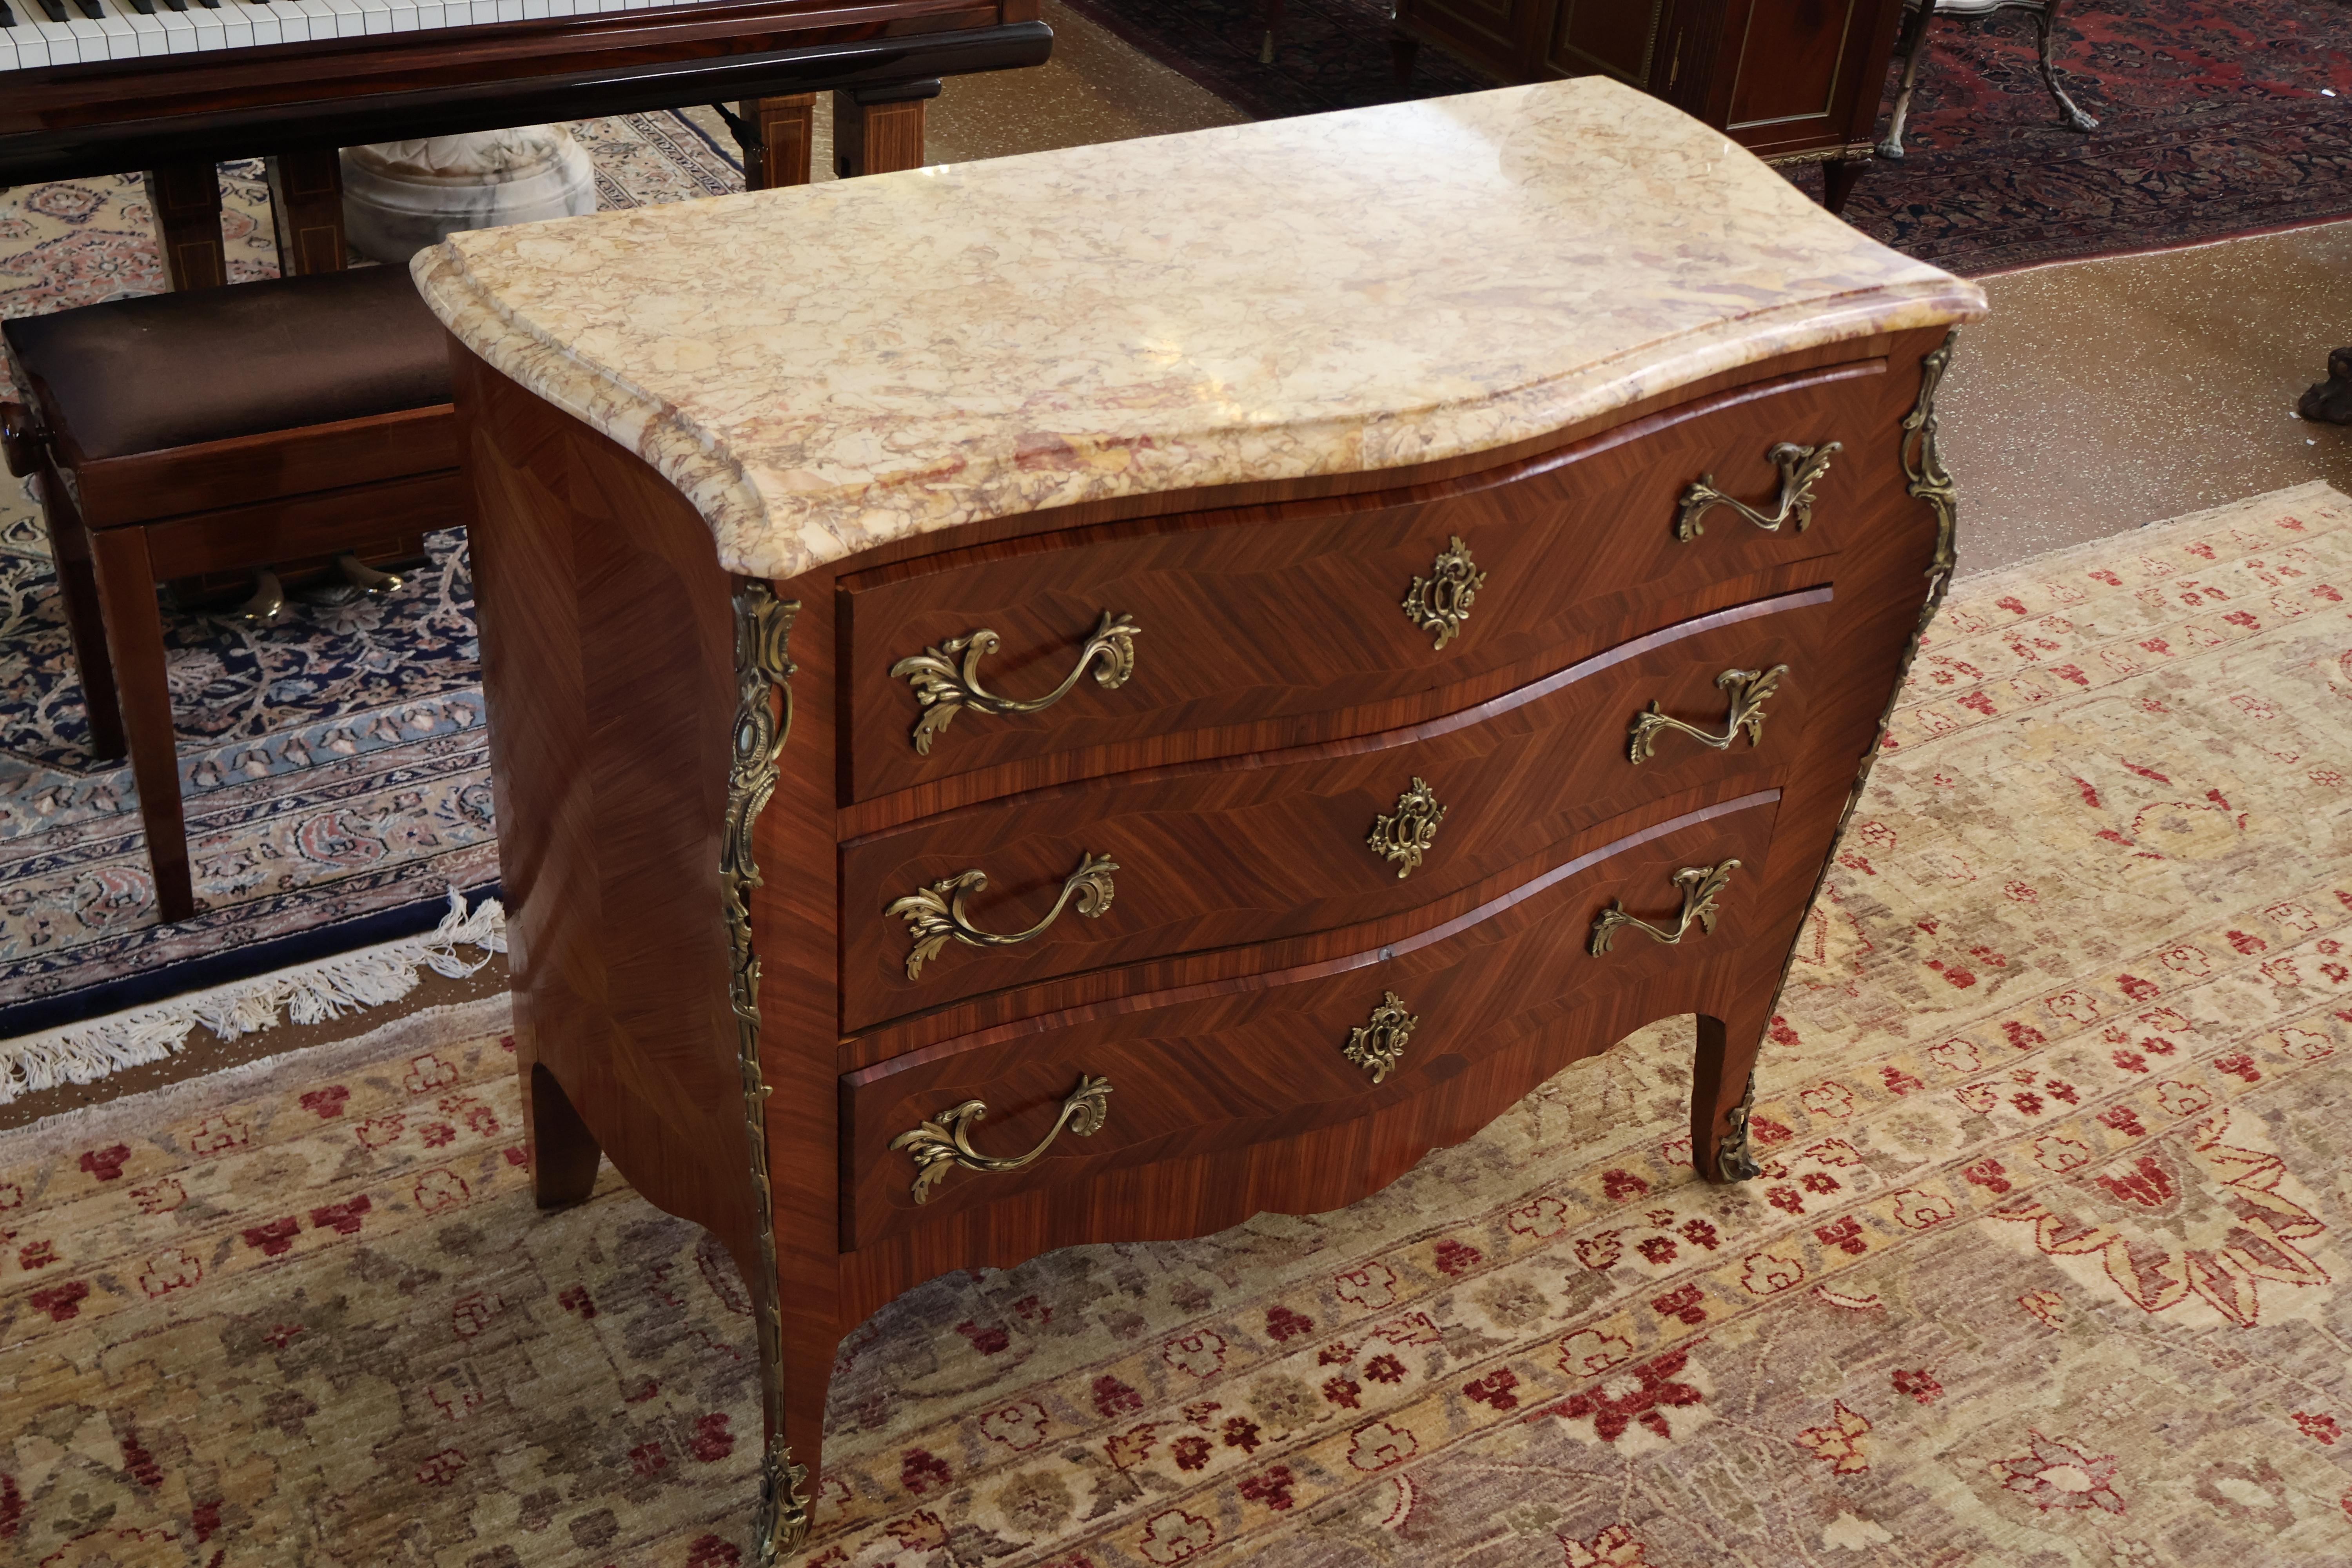 Mid-20th Century Italian Kingwood Marble Top Bronze Mounted Dresser Commode Chest of Drawers For Sale